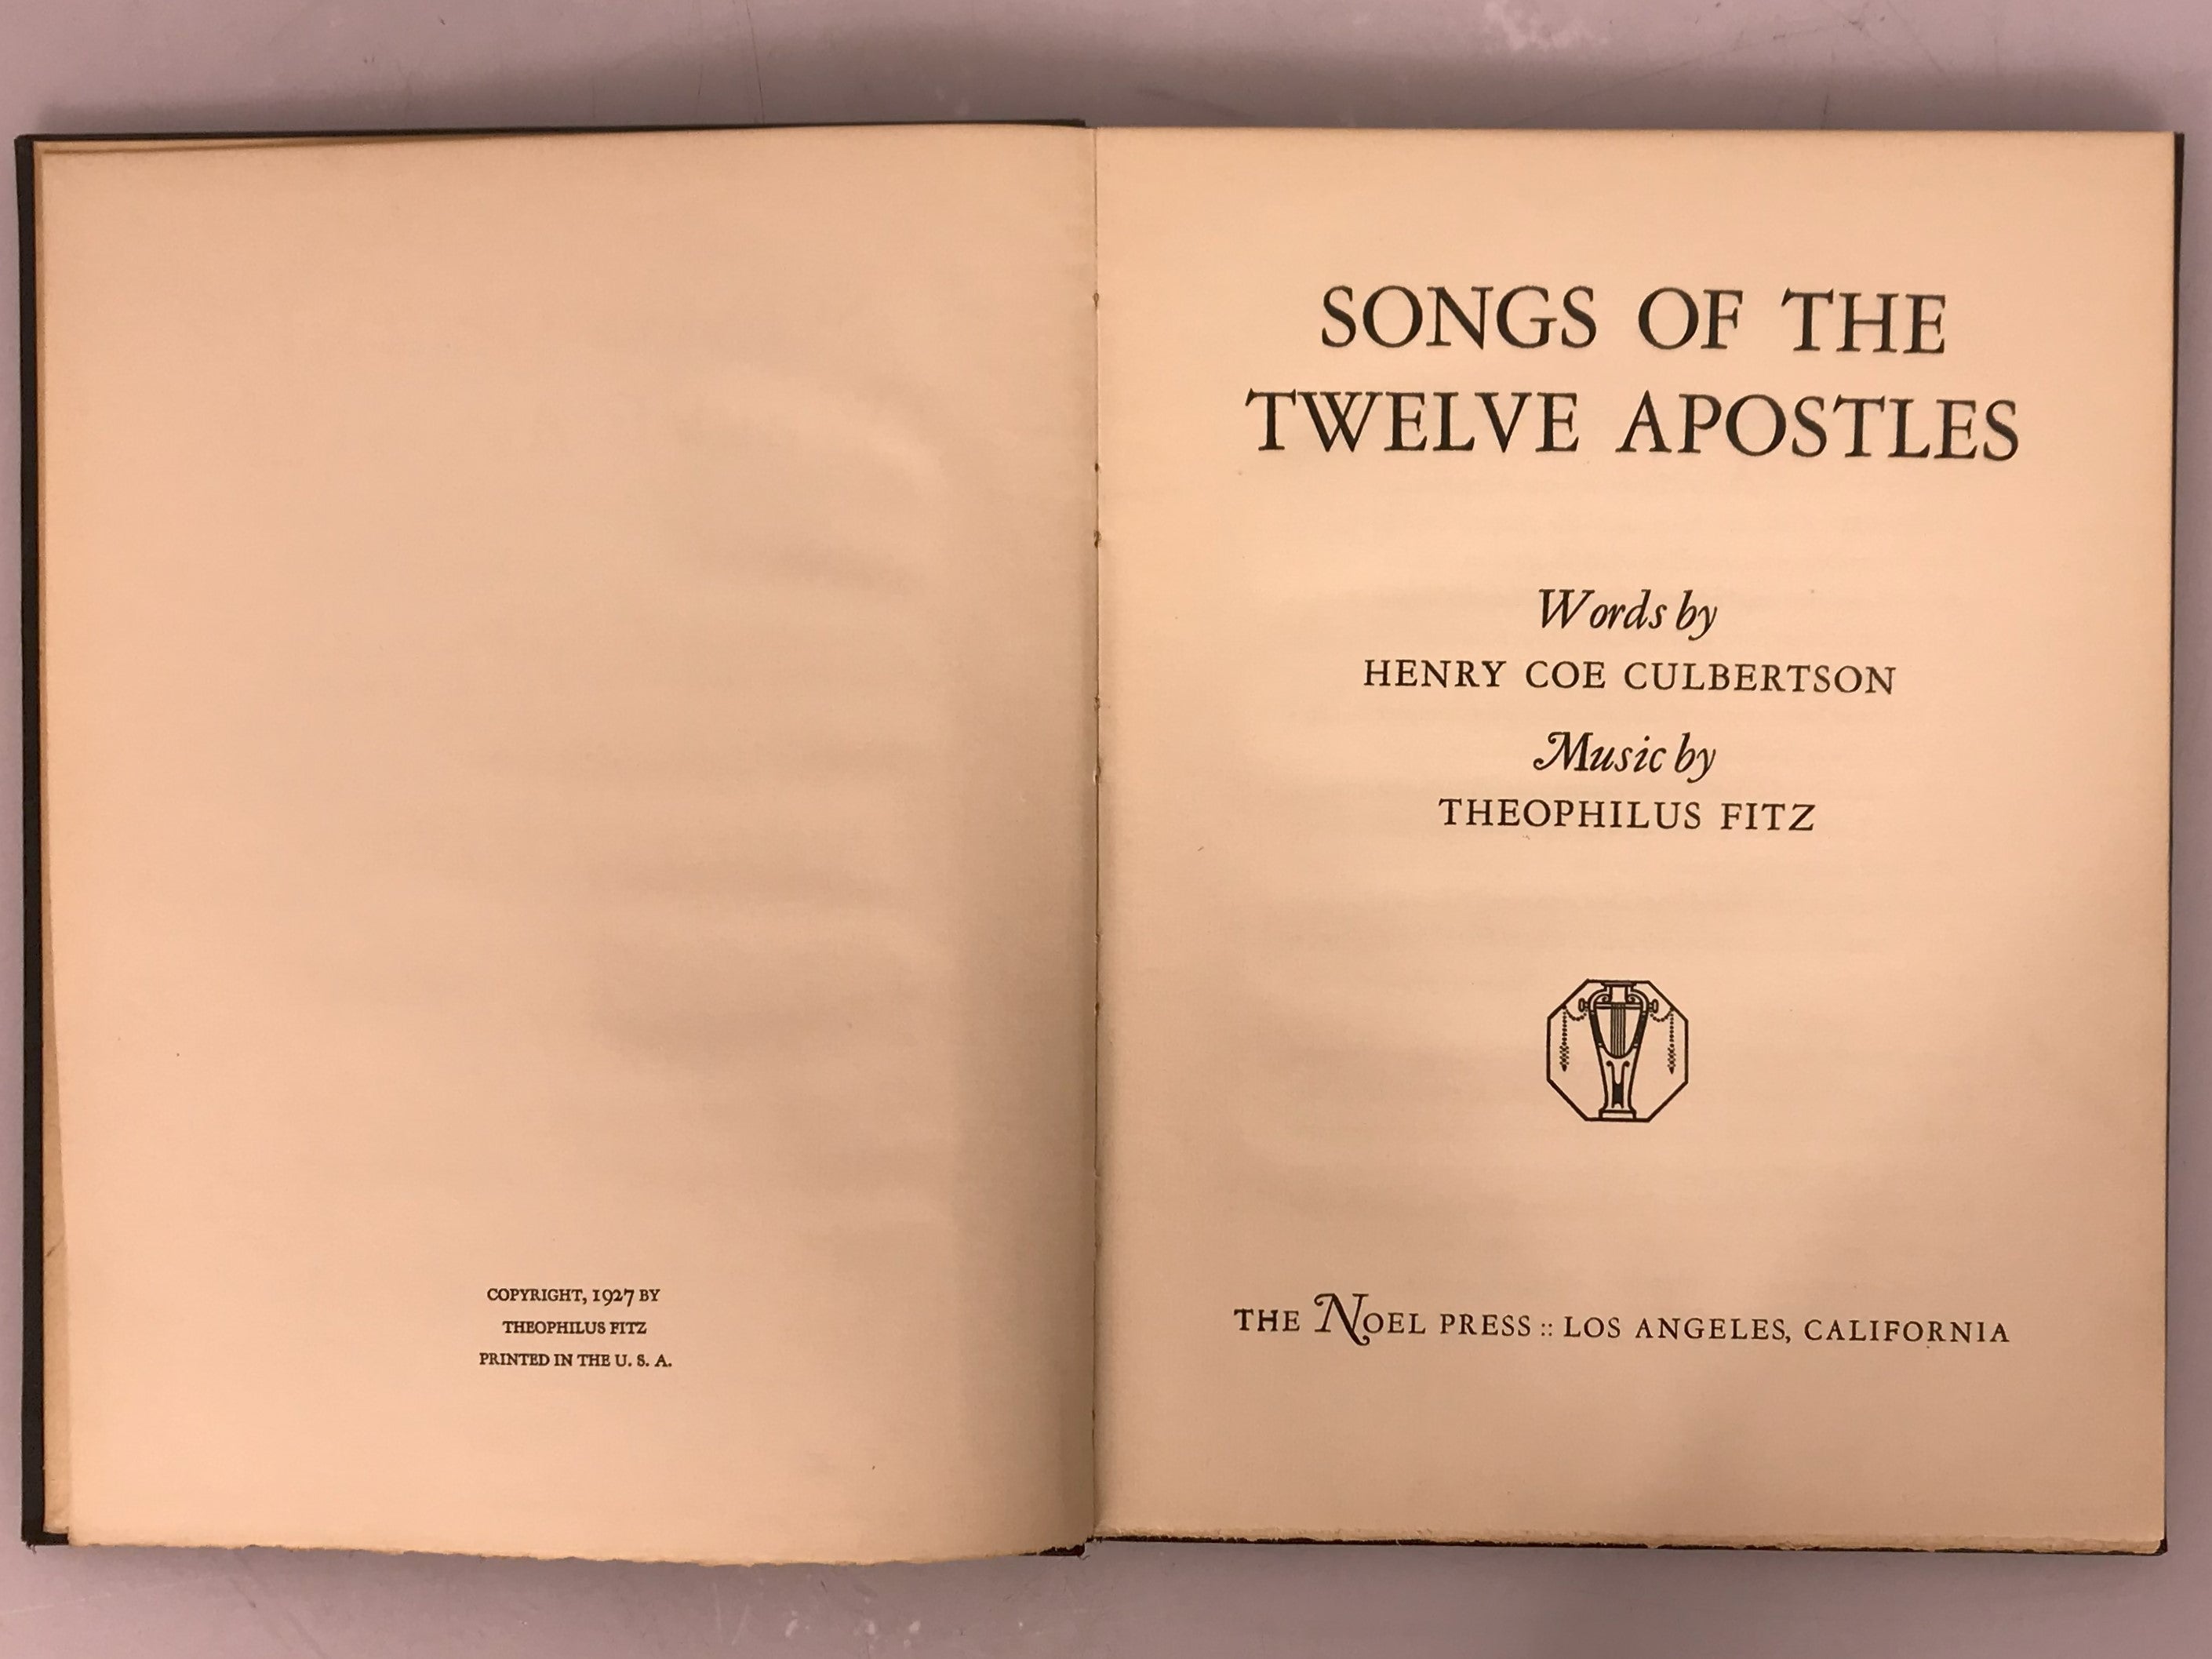 Songs of the Twelve Apostles by Culbertson and Fitz 1927